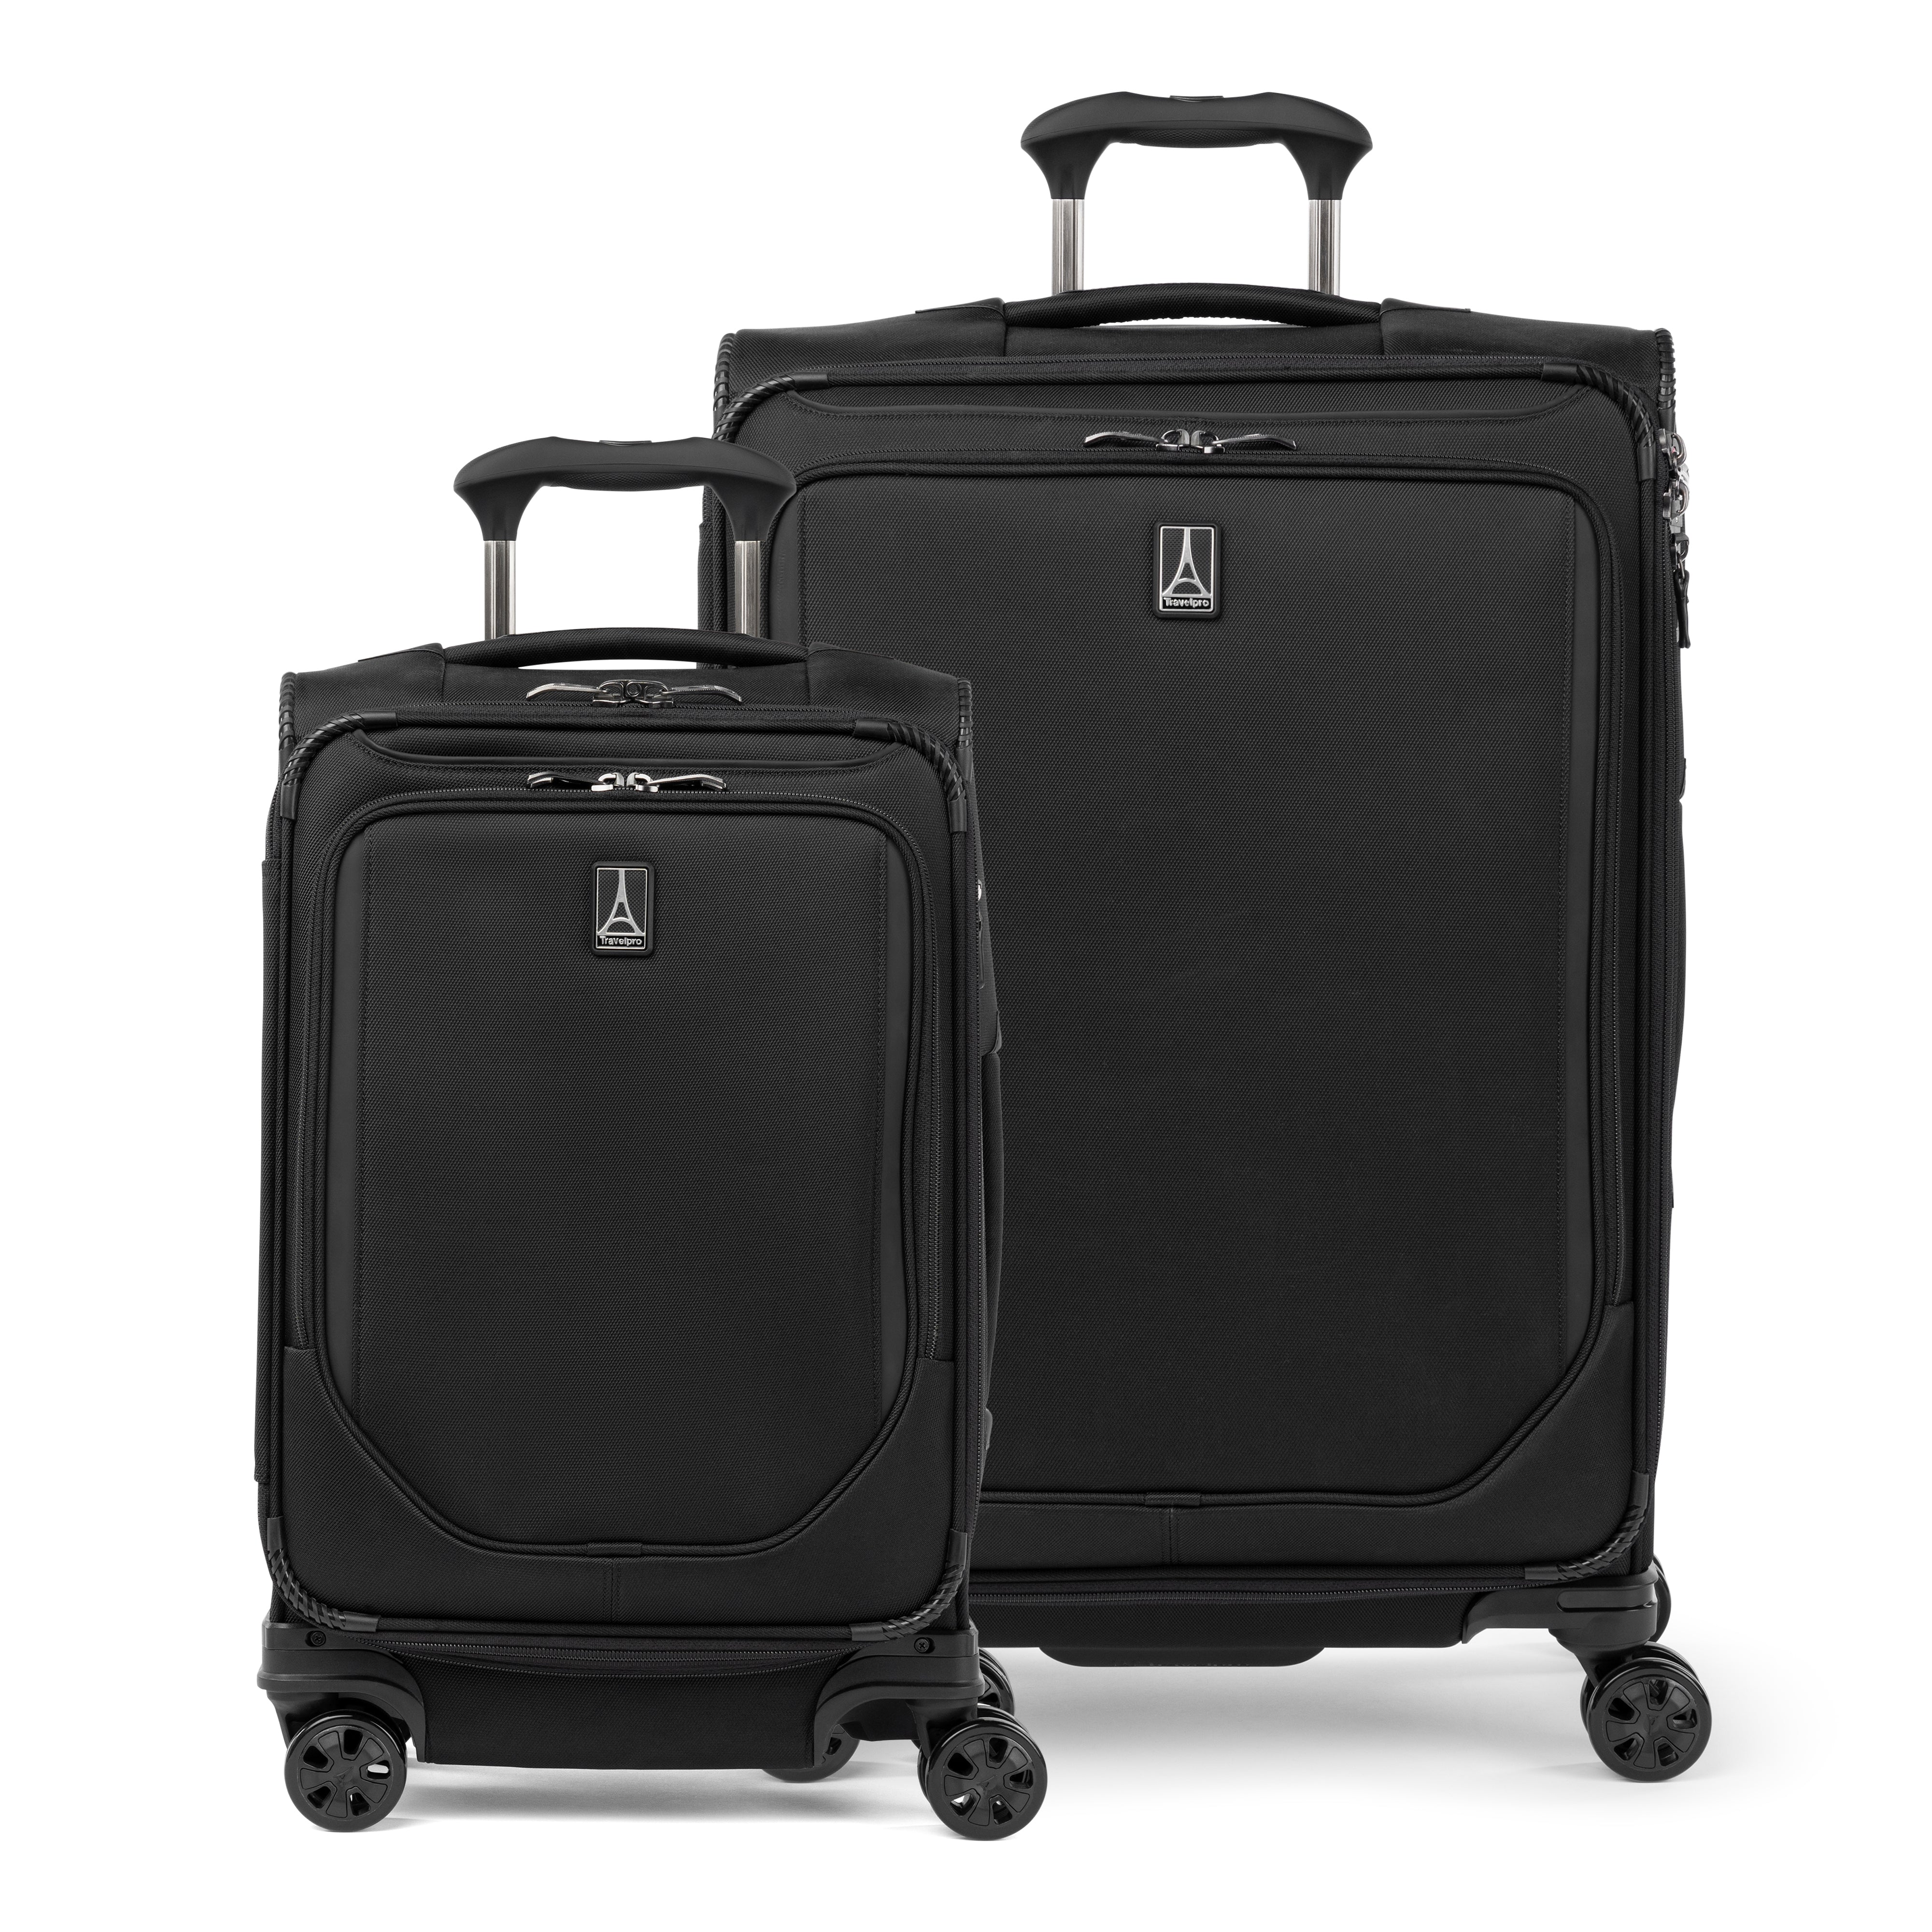 Crew™ Classic Carry-On / Medium Check-in Luggage Set